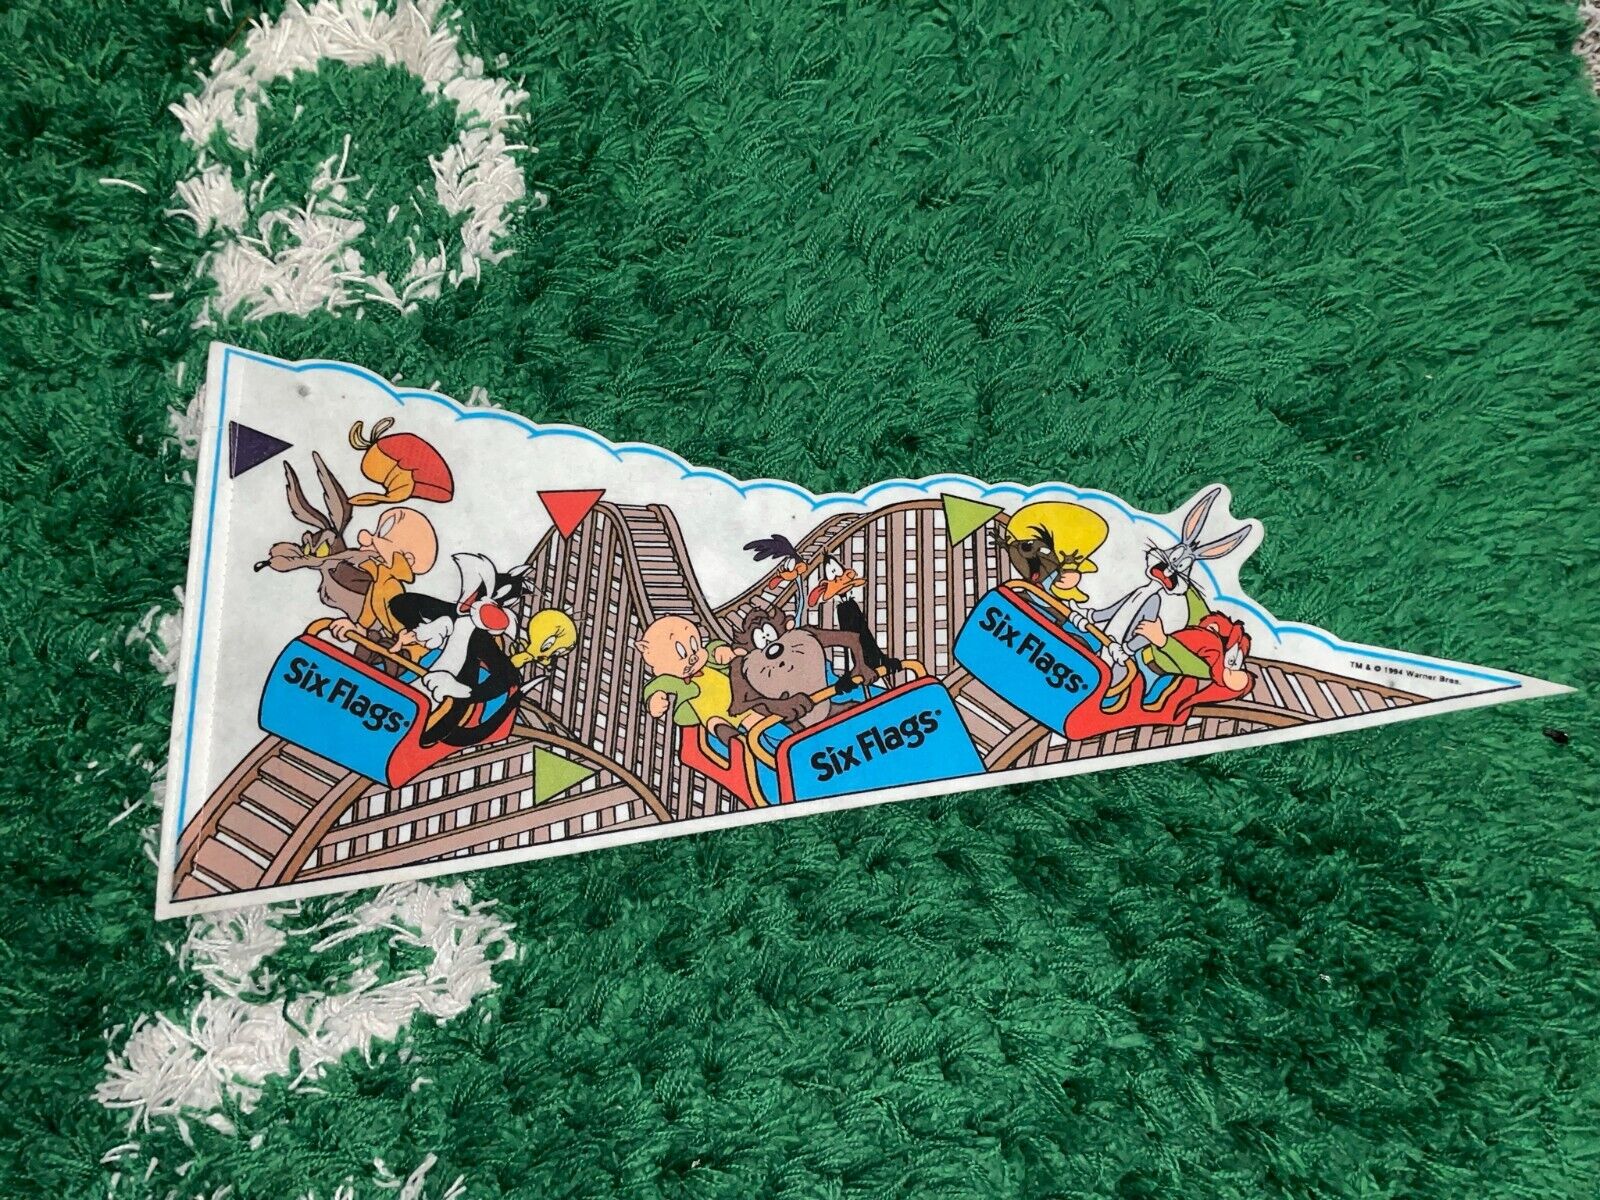 1994 Vintage Looney Tunes Six Flags Rollercoaster Graphic Pennant Flag VTG 90s